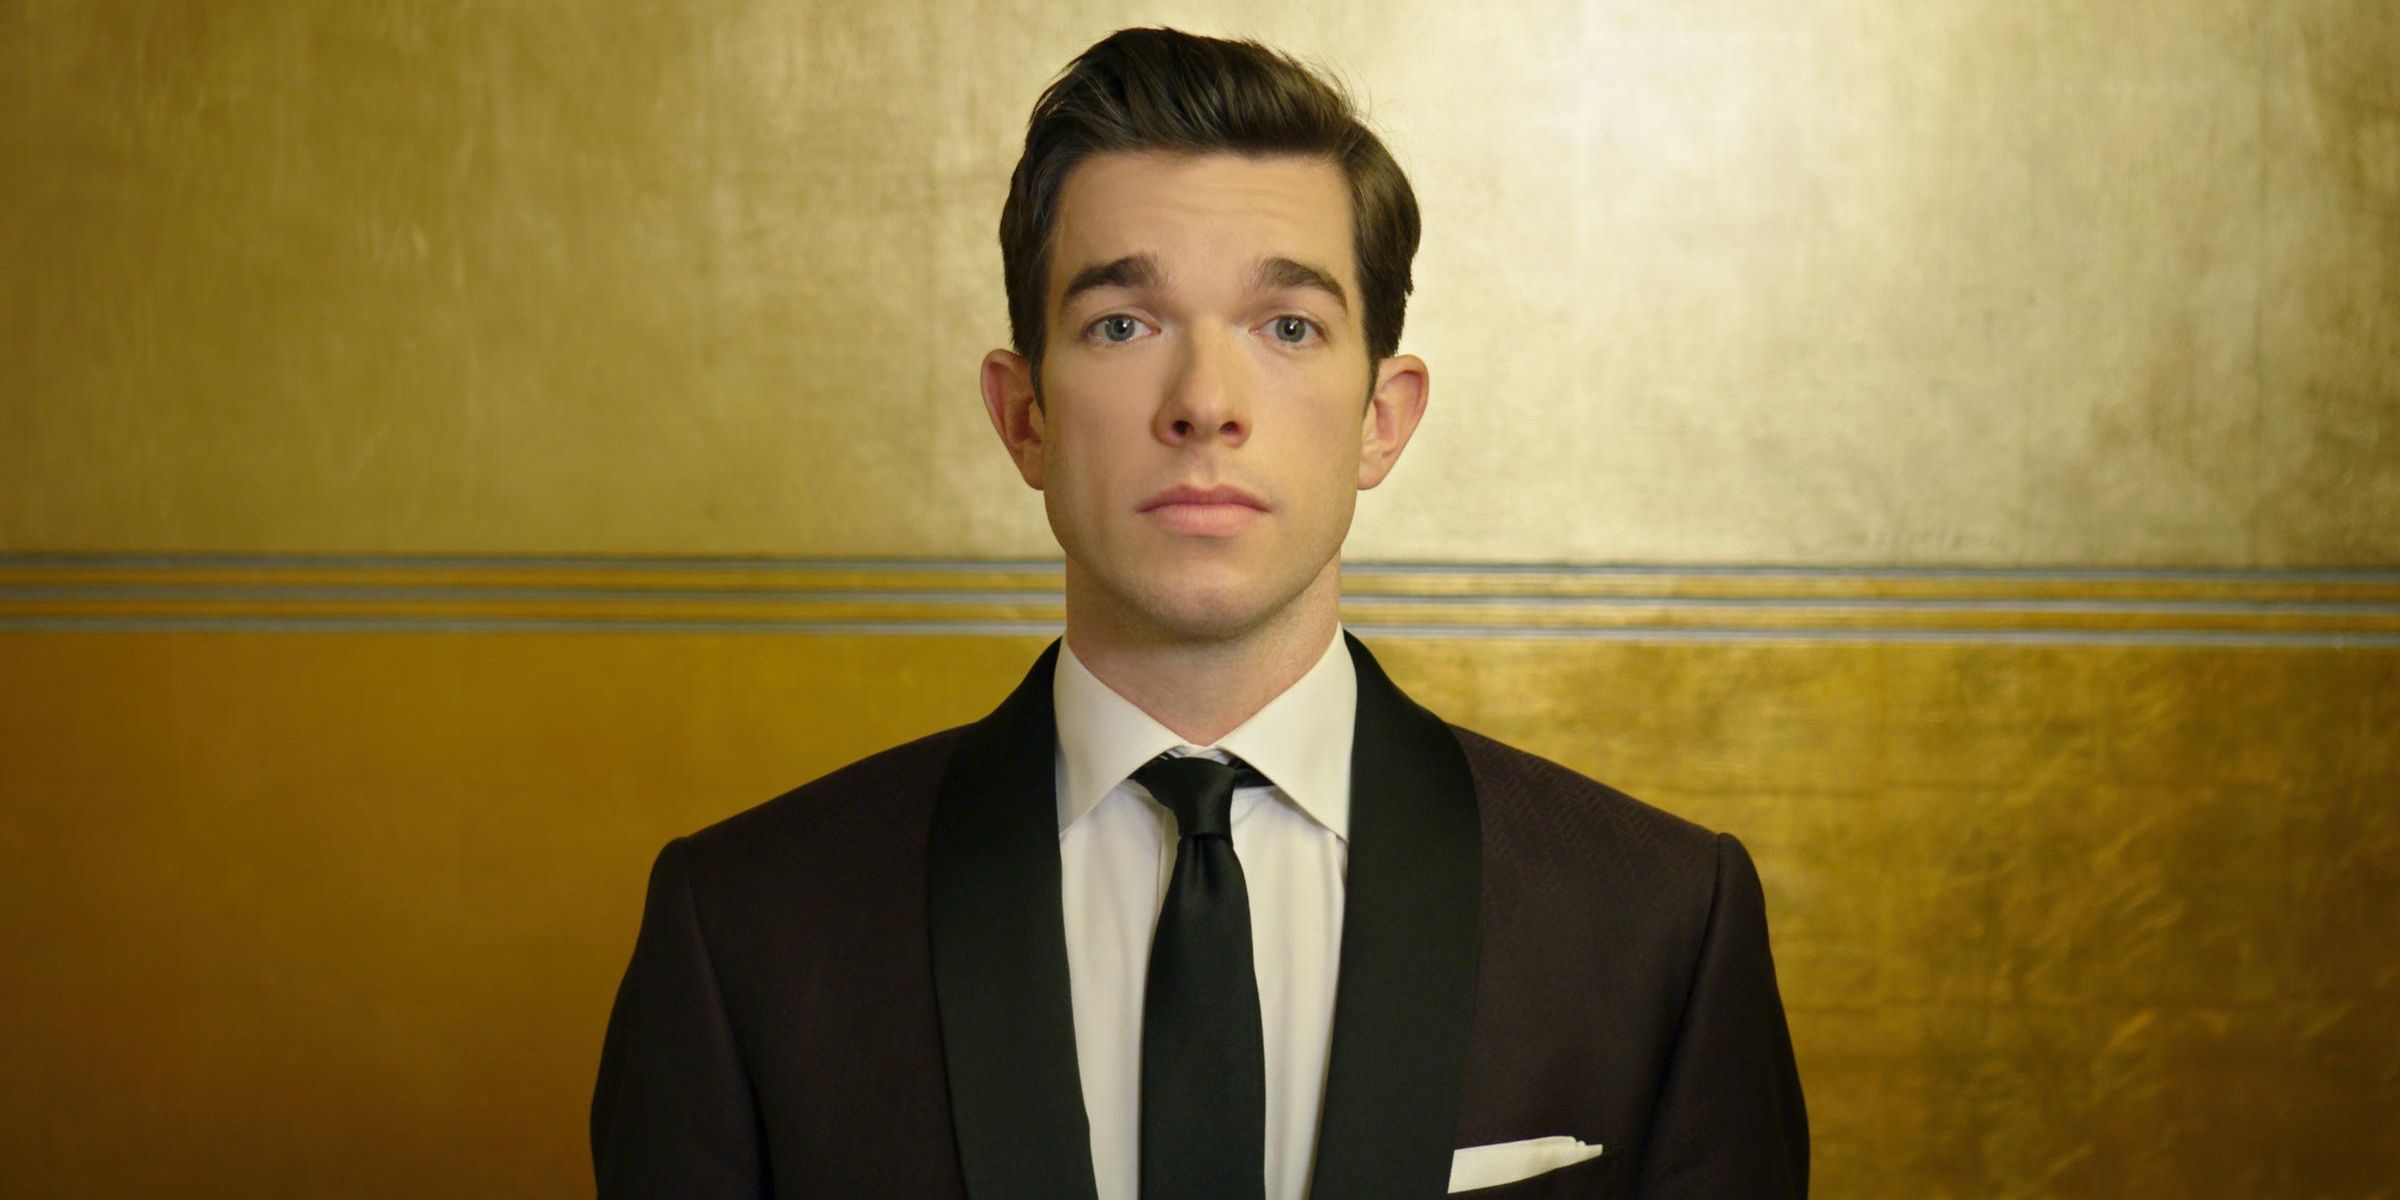 John Mulaney stares at the camera with a yellow background